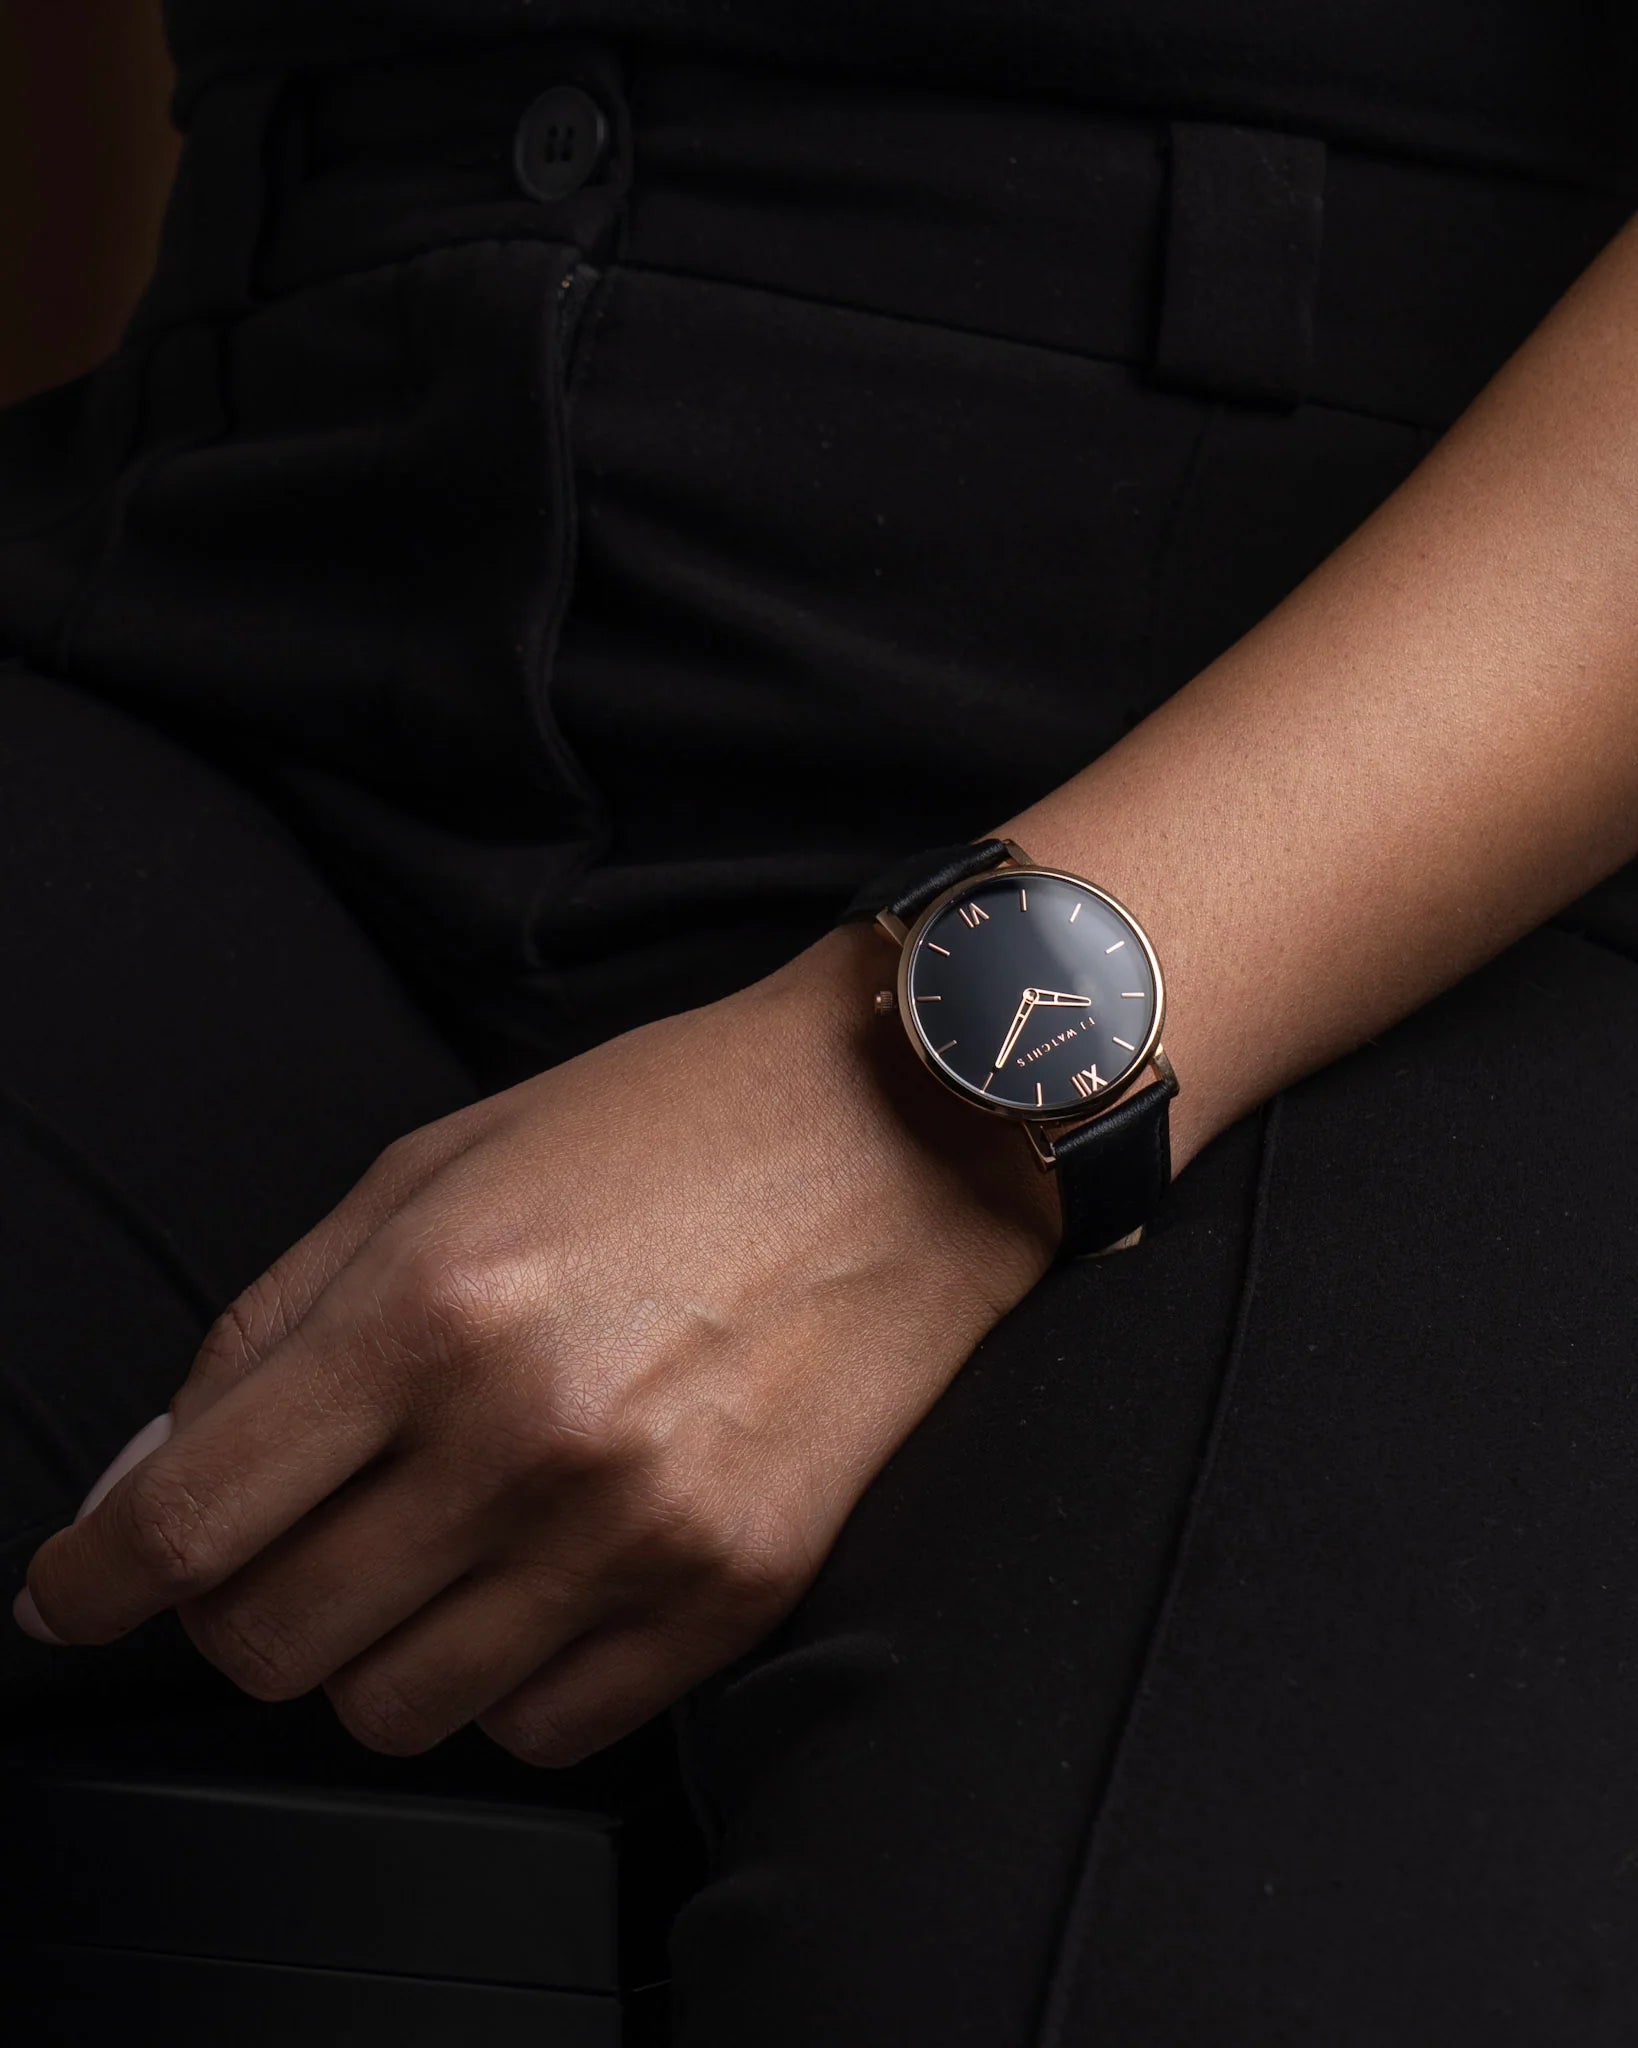 Discover the Golden Moon set, a 36mm men and women watch from Five Jwlry. Equipped with a minimalist black and rose gold dial. In this special edition, this watch comes with two leathers, one black leather and one brown. The perfect gift!